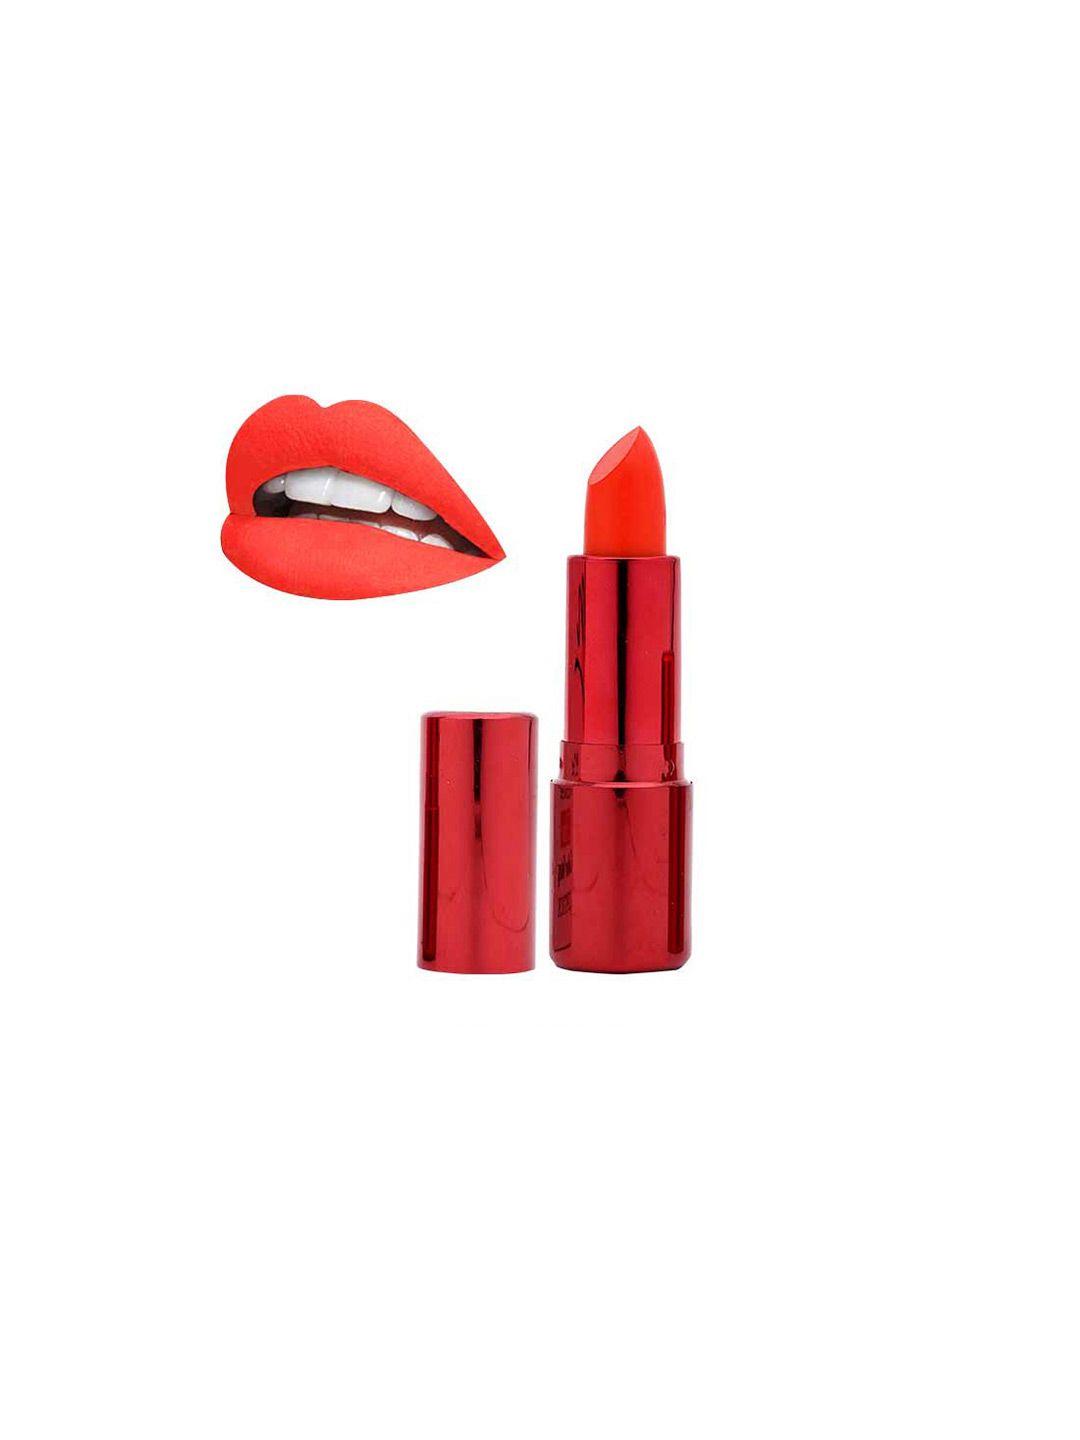 beautyrelay london 12 hour color stay lipstick with vitamin c 3.5g - coral red